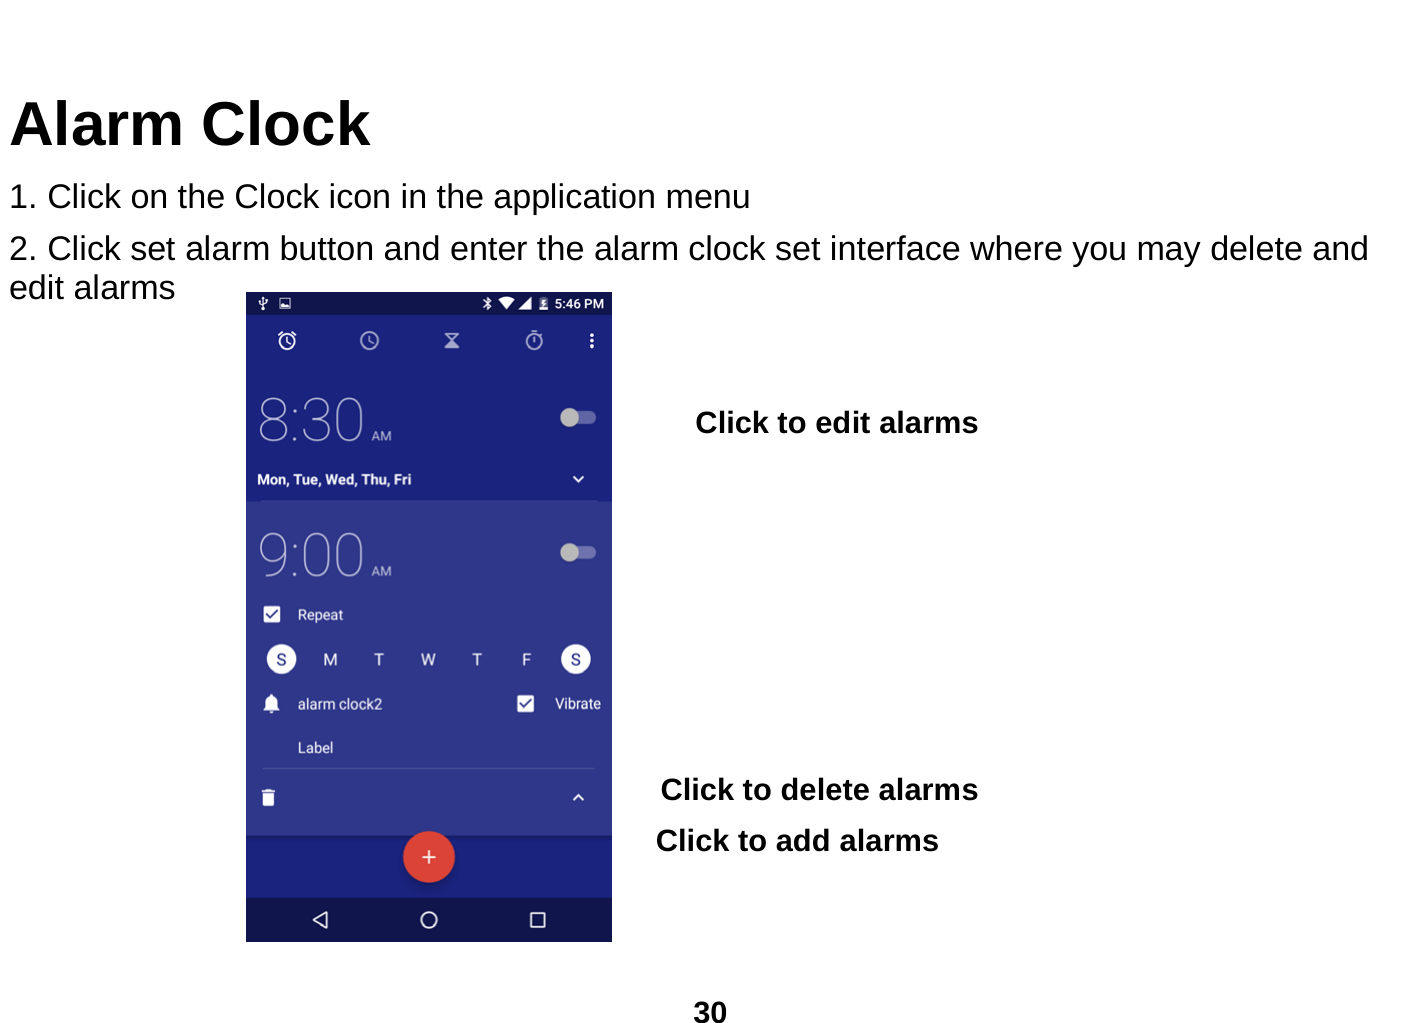  30  Alarm Clock 1. Click on the Clock icon in the application menu 2. Click set alarm button and enter the alarm clock set interface where you may delete and edit alarms         Click to delete alarms Click to add alarms Click to edit alarms 